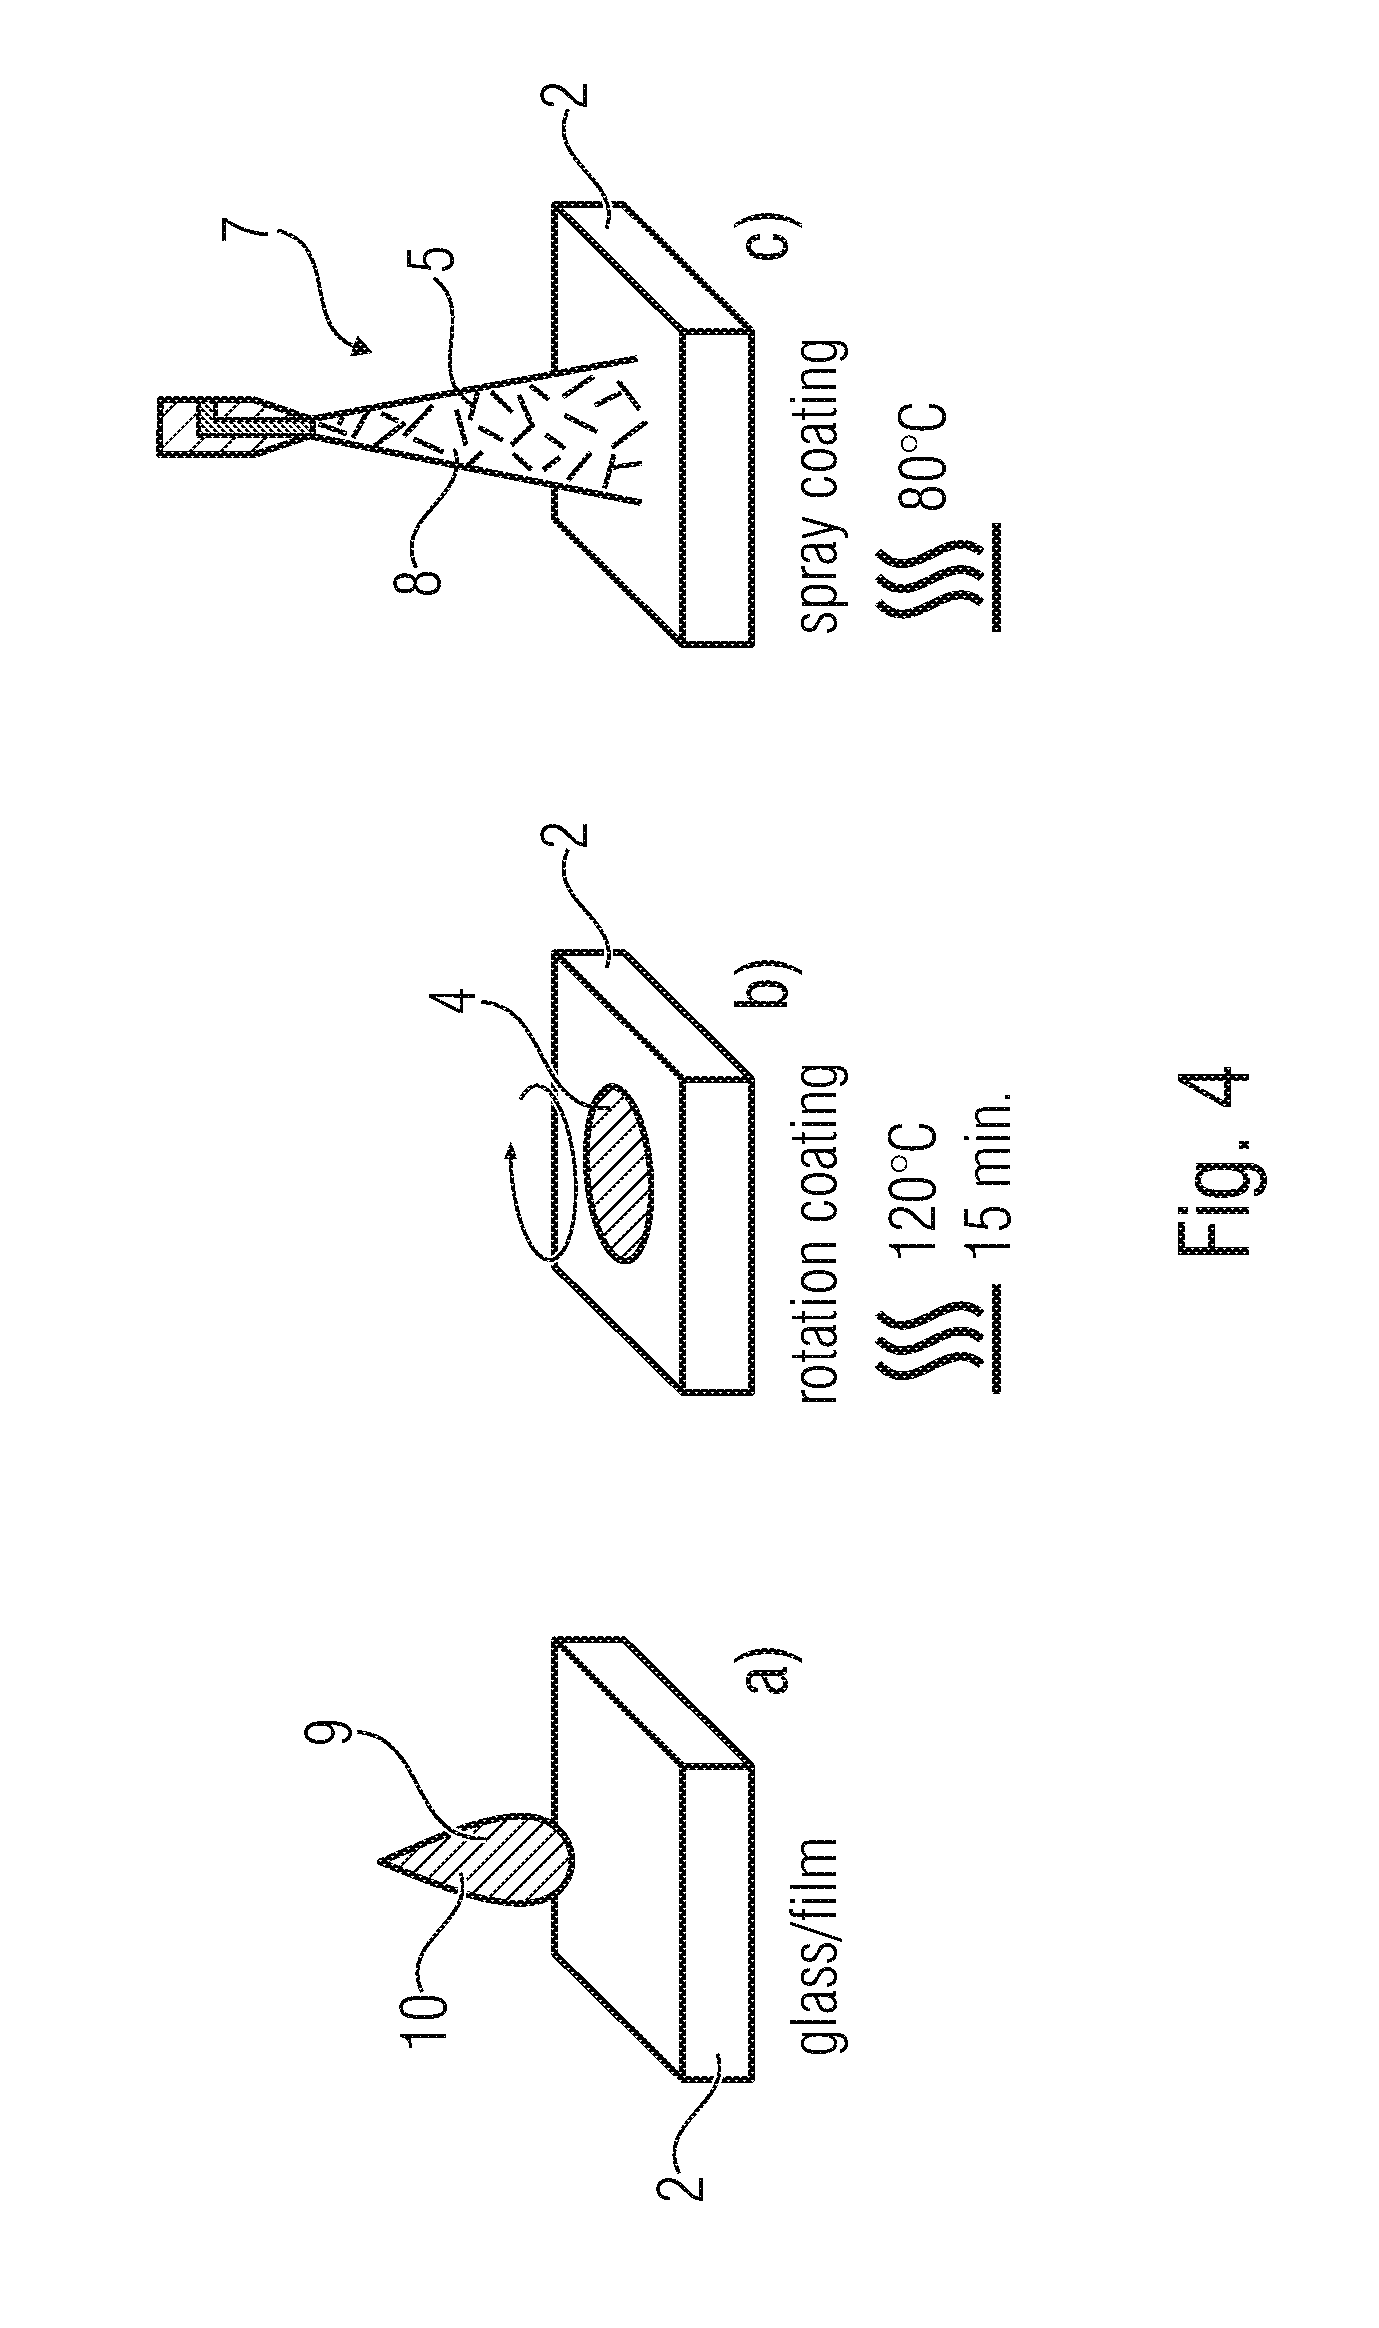 Transparent nanowire electrode comprising a functional organic layer